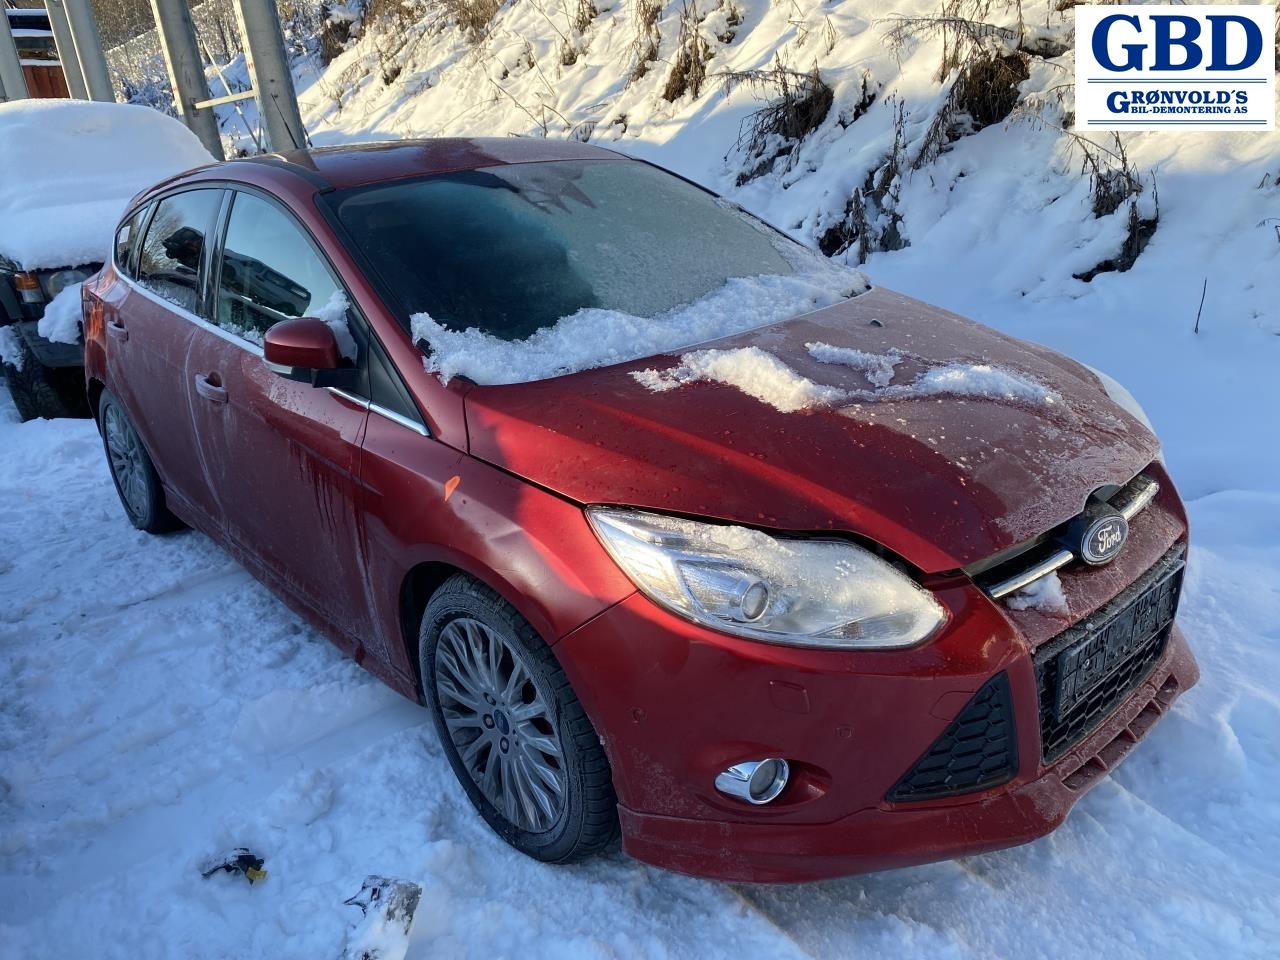 Ford Focus, 2011-2014 (Type III, Fase 1) parts car, Engine code: M1DA, Gearbox code: 1836357